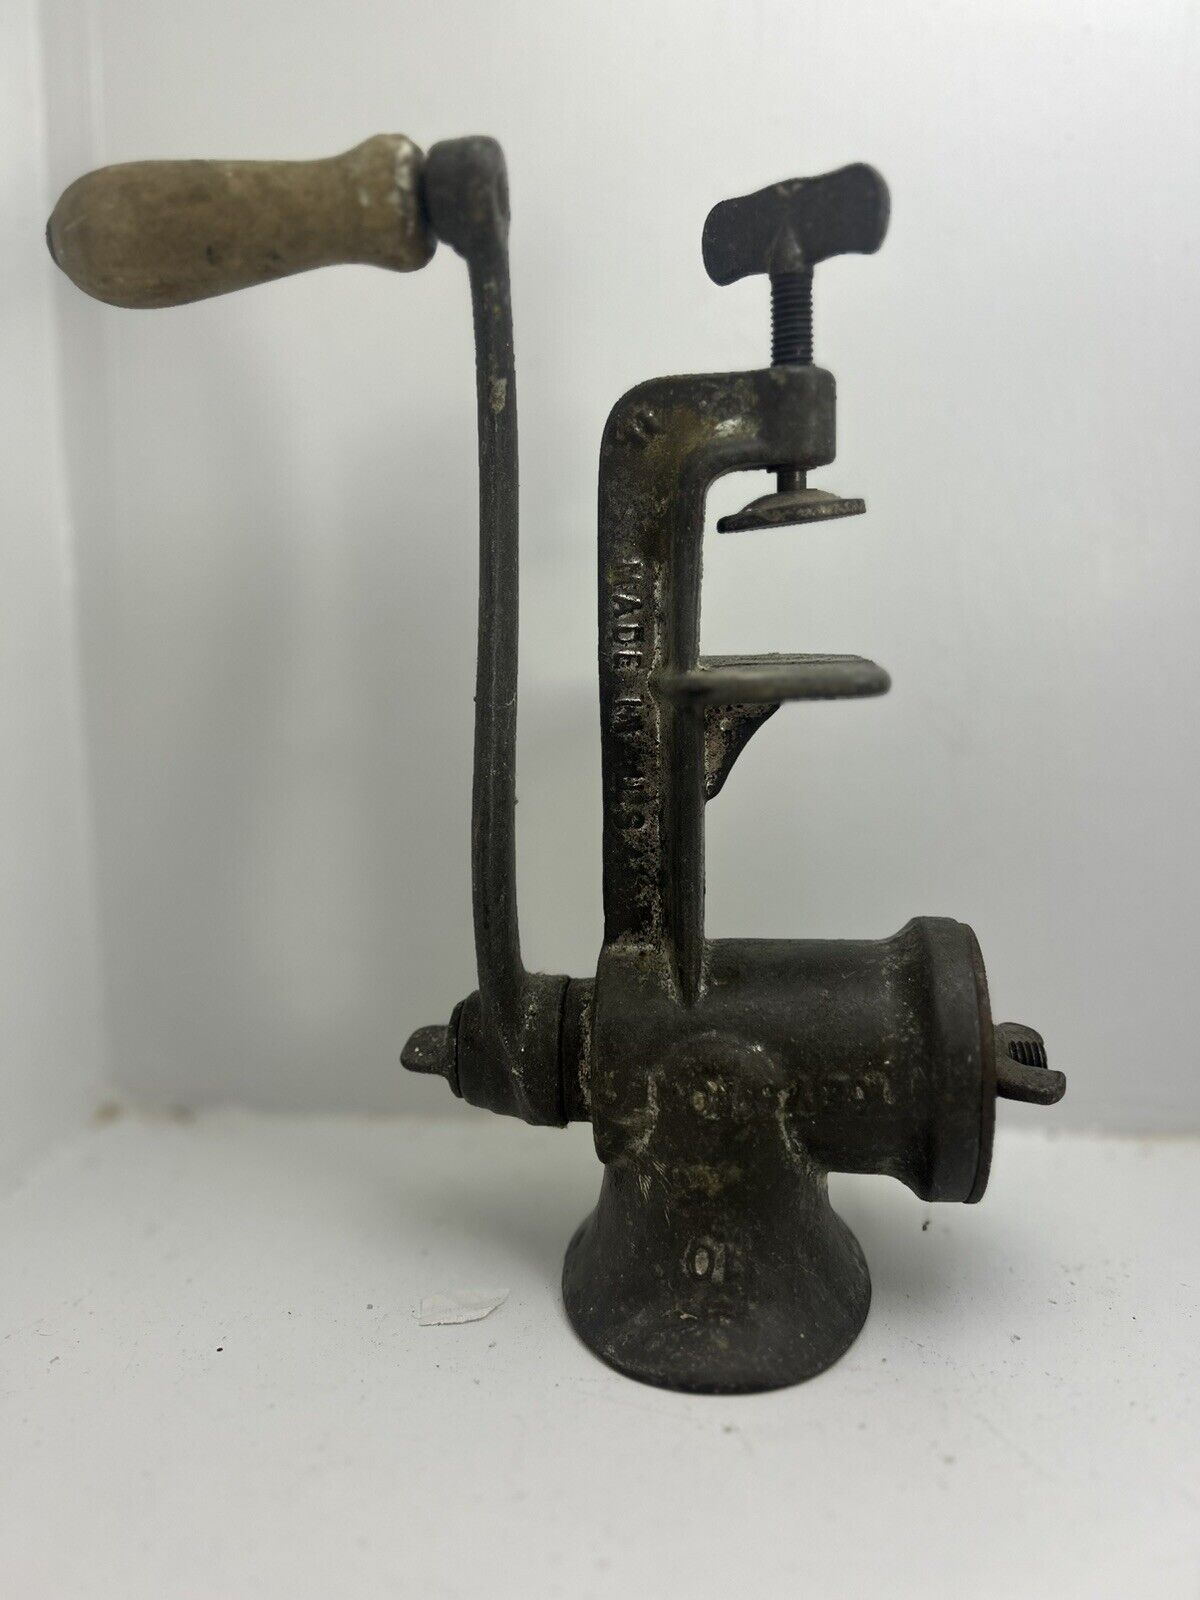 Vintage Keystone 10 Meat Grinder with 1 attachment